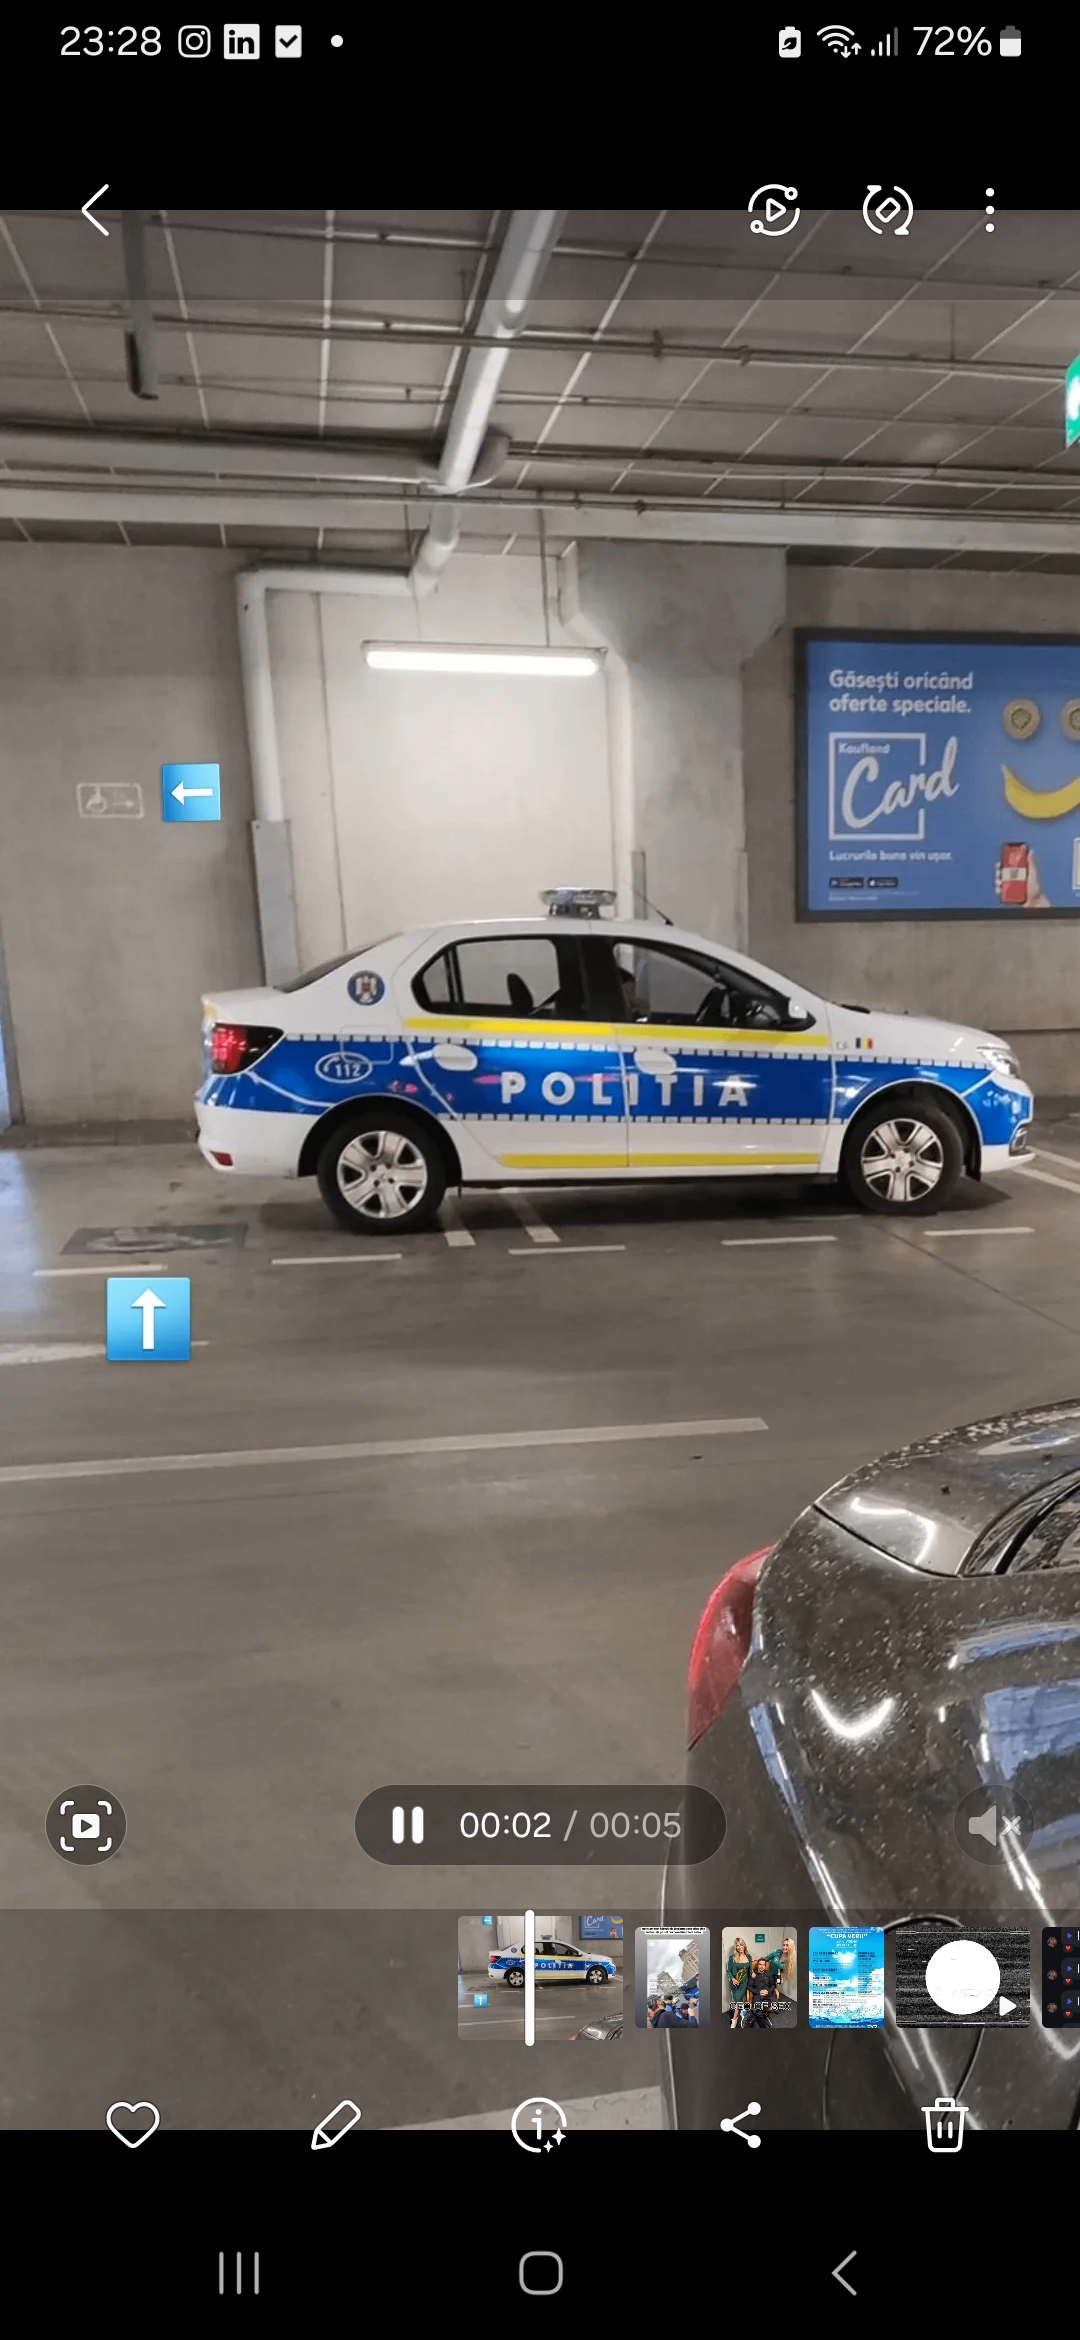 a police car in a parking lot